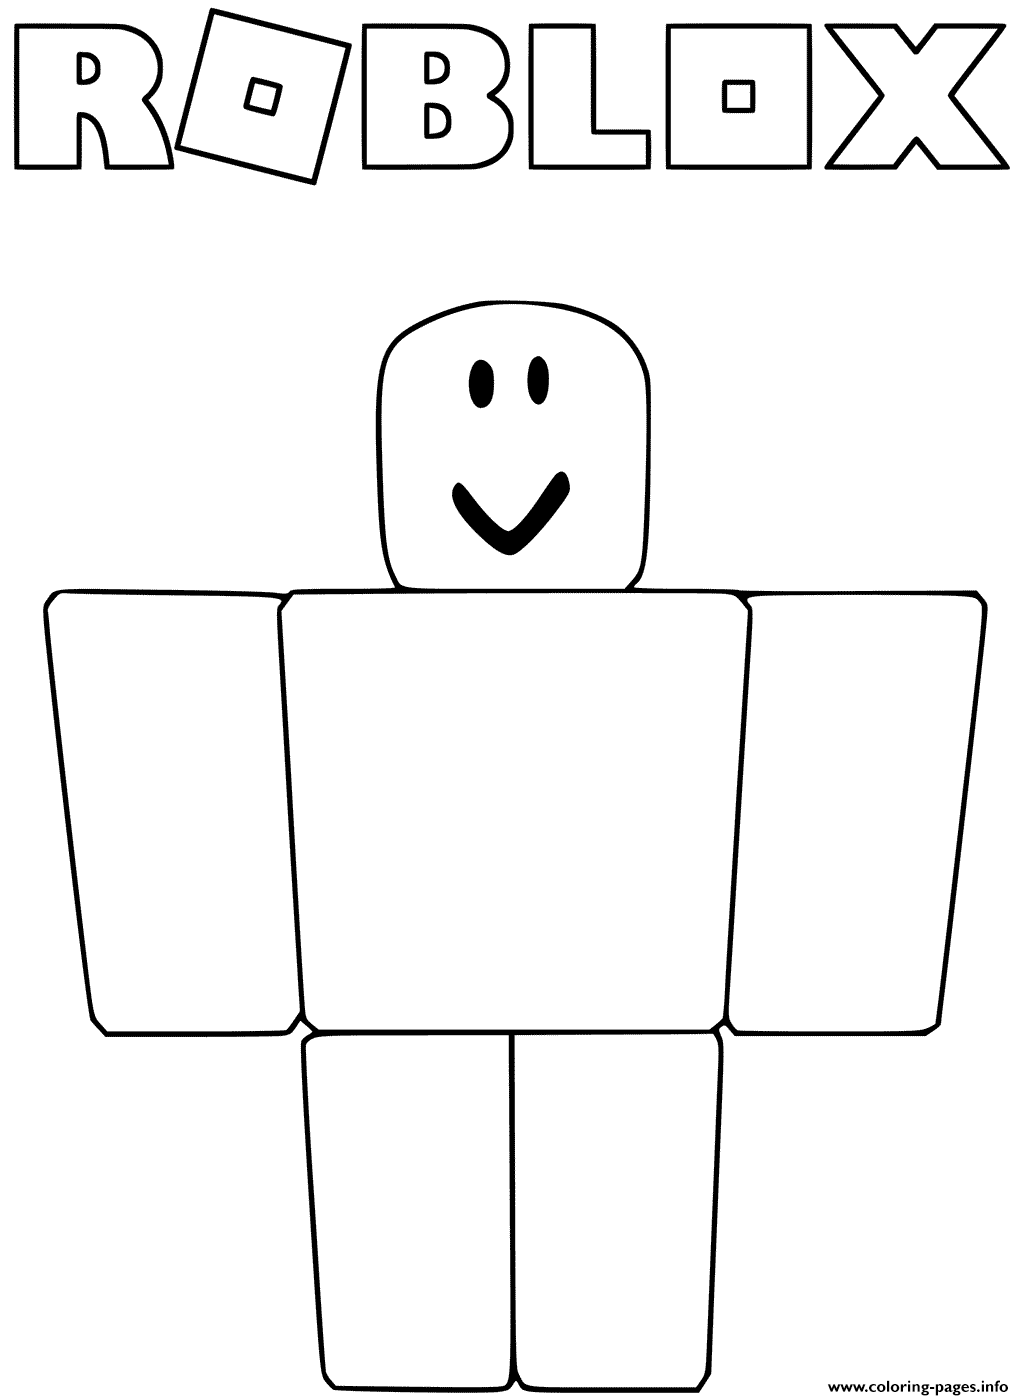 Free Printable Roblox Avatar Roblox Coloring Pages